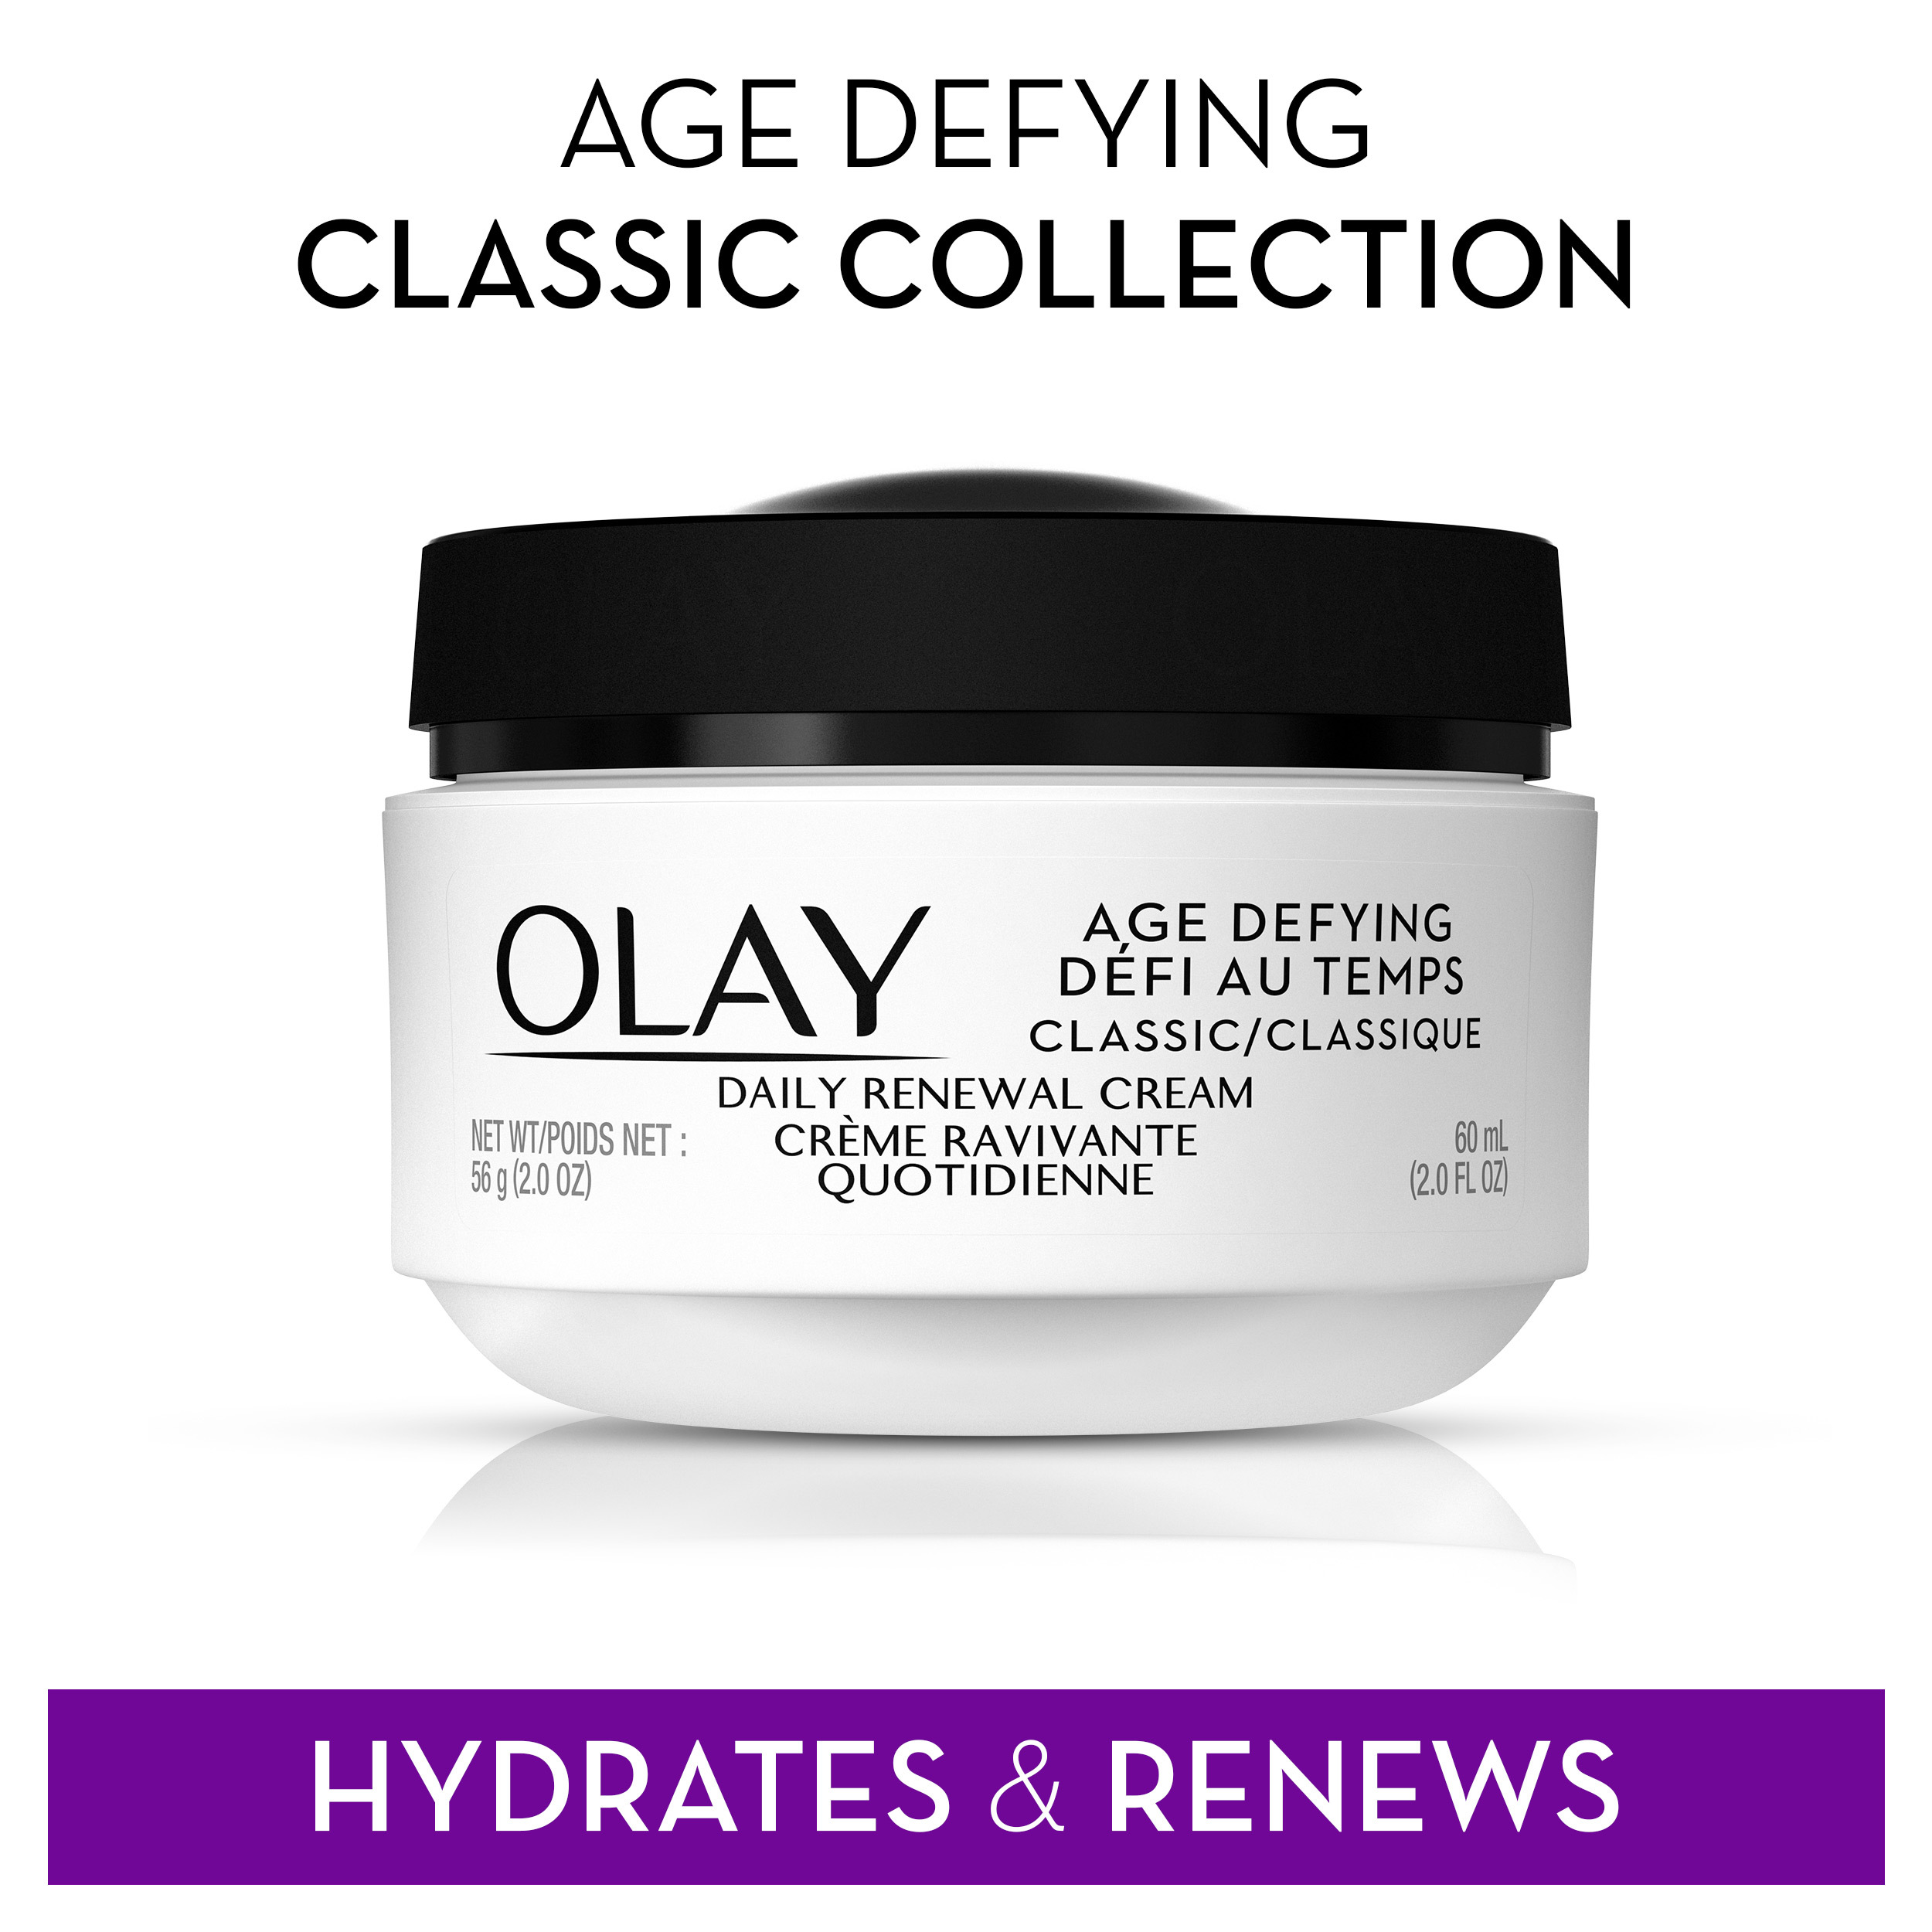 Olay Age Defying Classic Daily Renewal Cream, Face Moisturizer for Dull Combination Skin, 2.0 fl oz - image 3 of 10